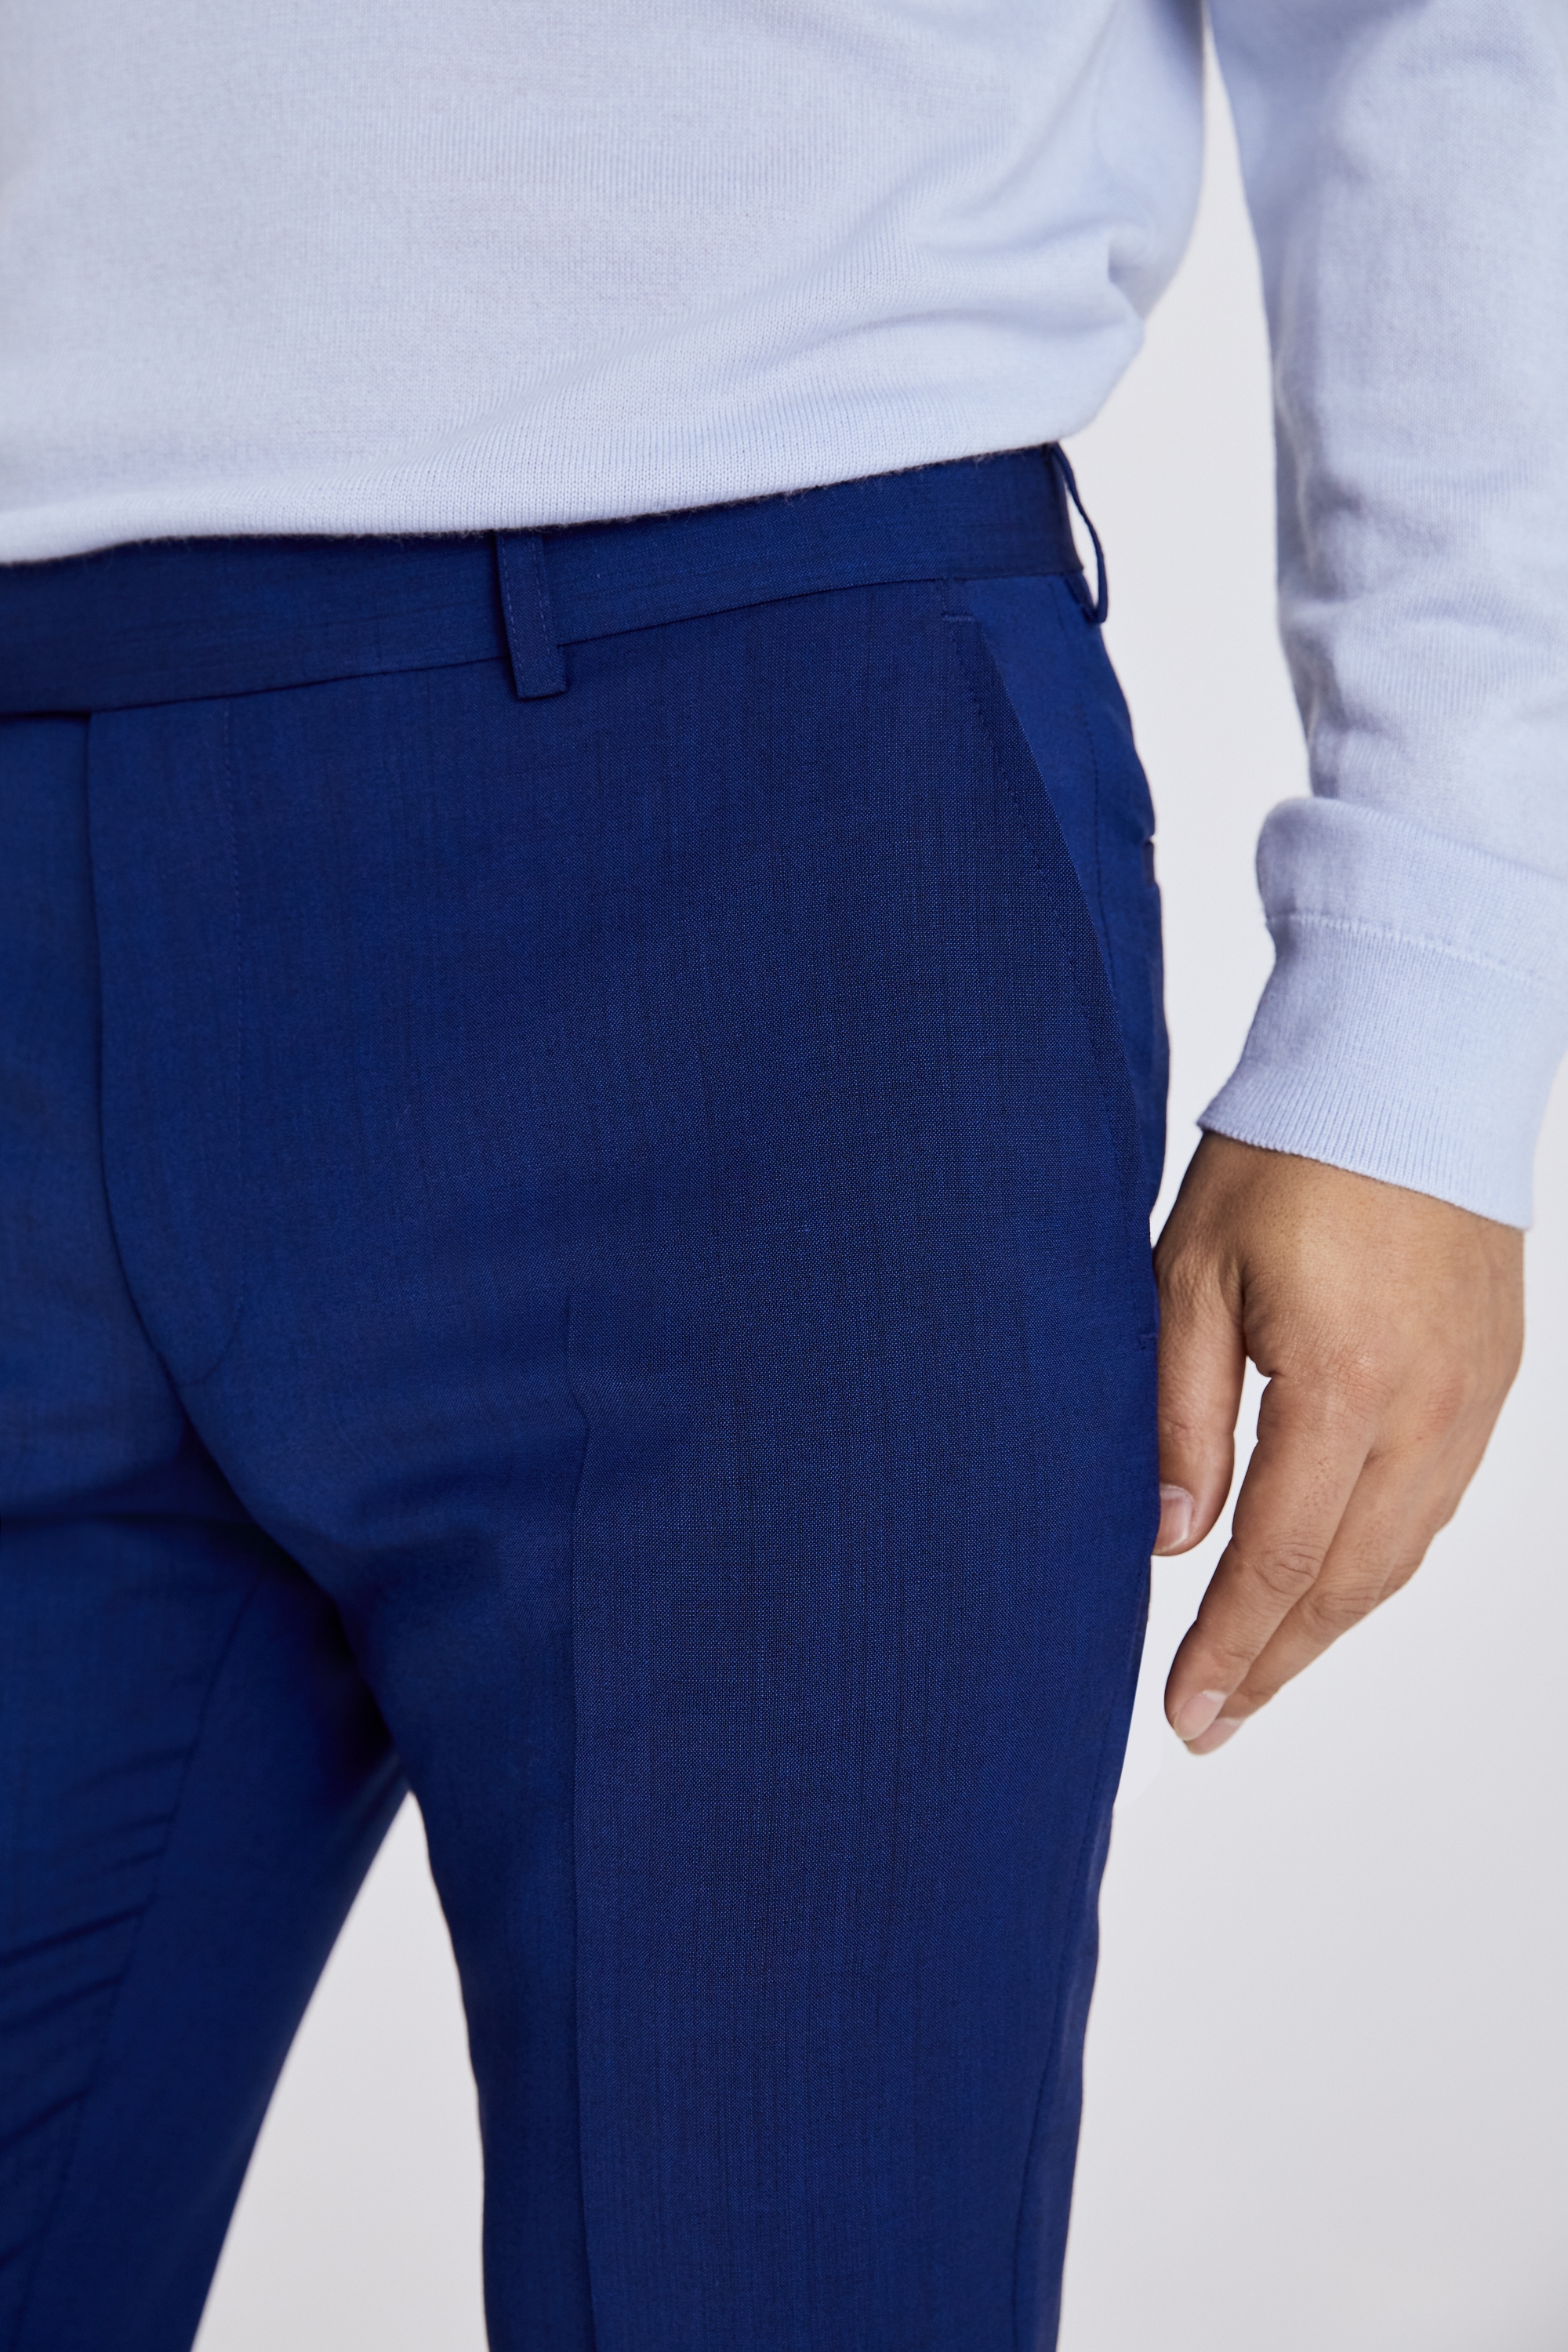 Slim Fit Bright Blue Trousers | Buy Online at Moss